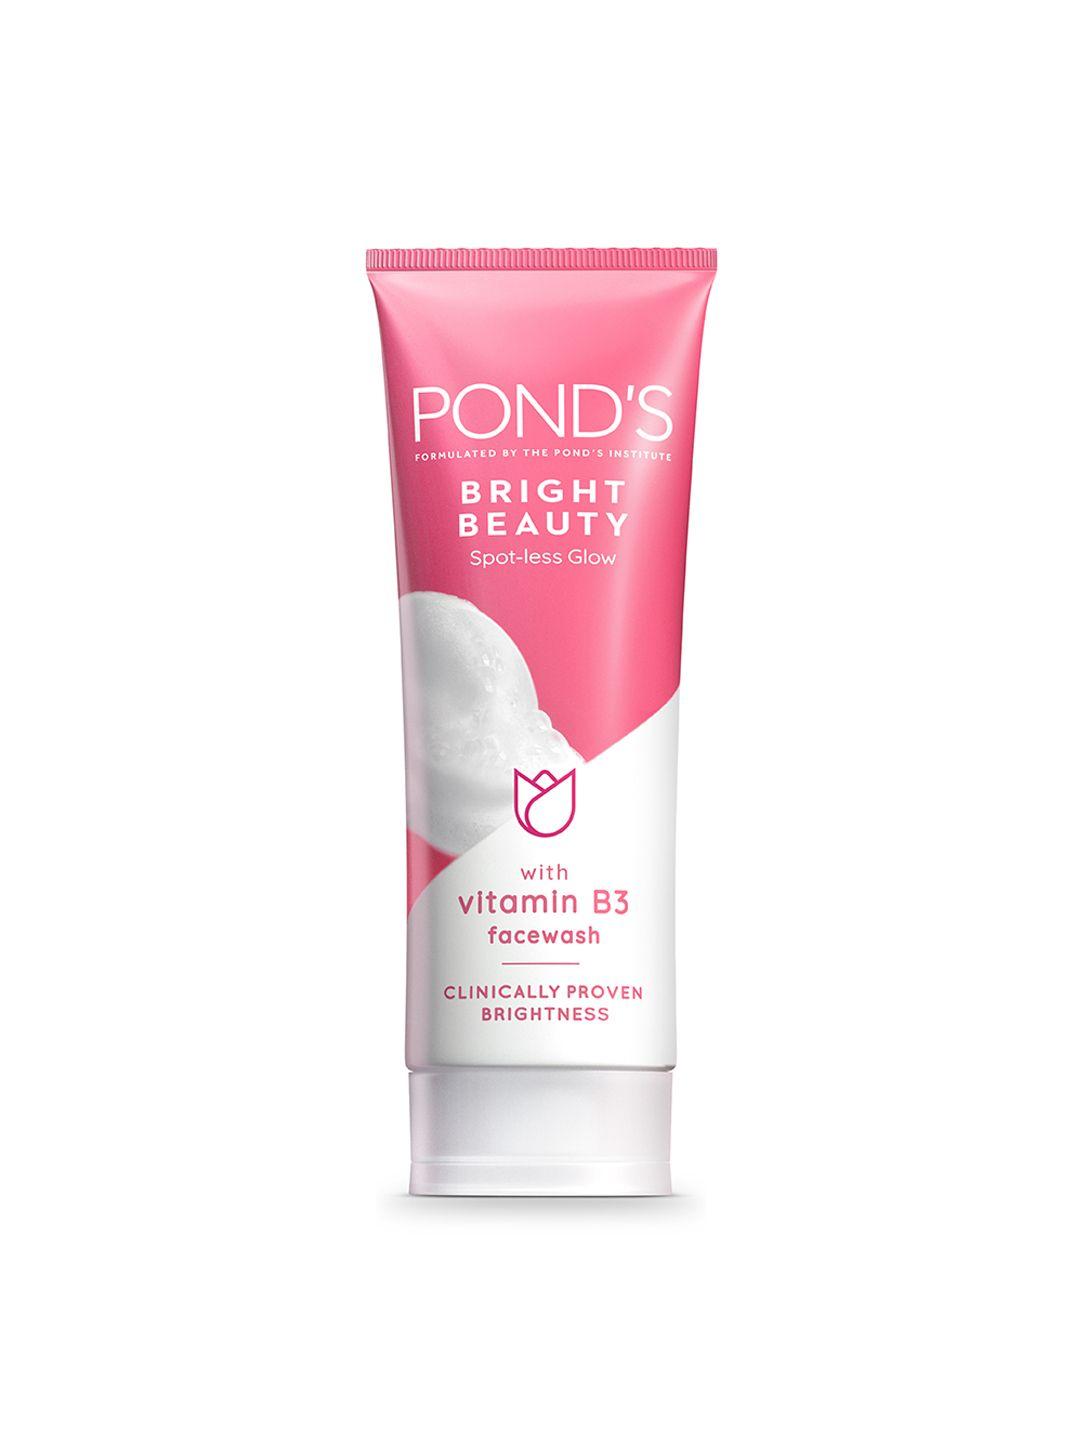 ponds bright beauty spot-less glow face wash with vitamins - 100 g